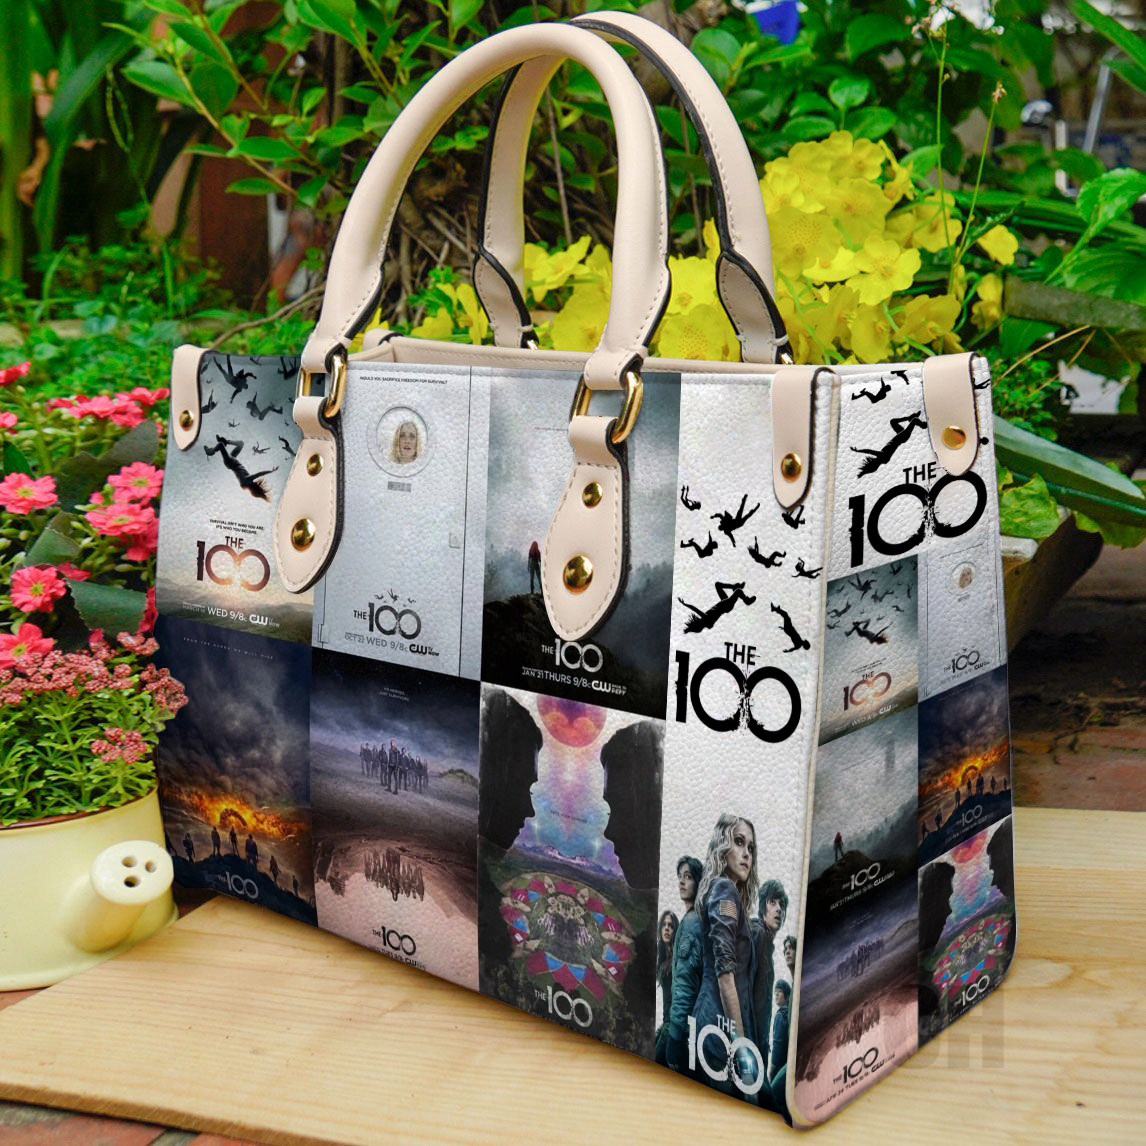 The 100 show Women Leather Hand Bag